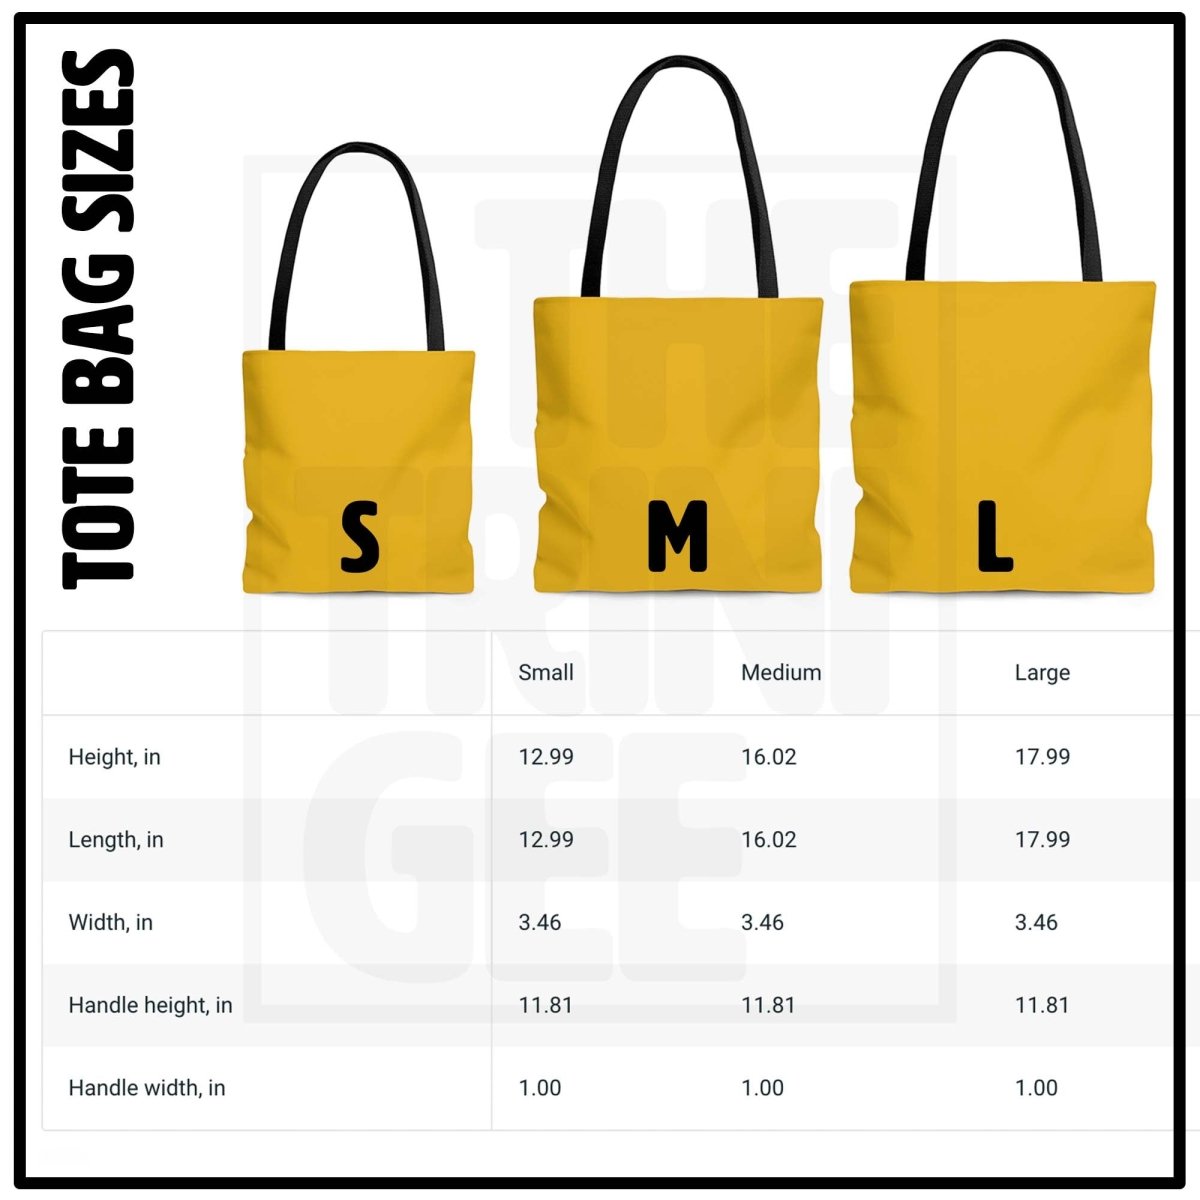 Curly Reader Tote Bag - The Trini Gee